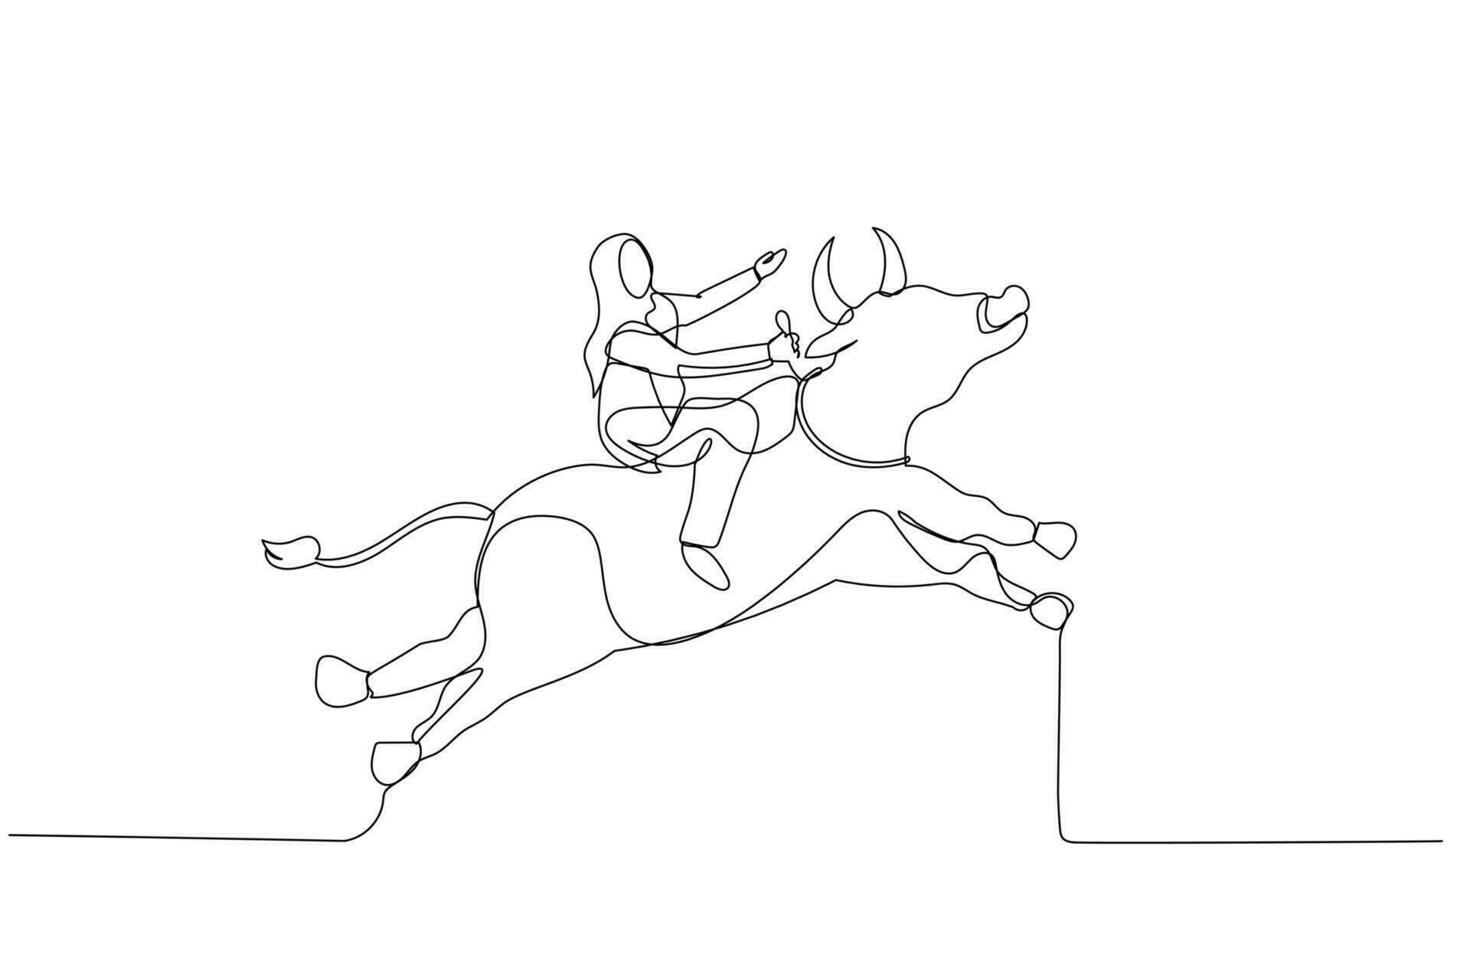 muslim woman riding a bull going up showing rising and bull market vector